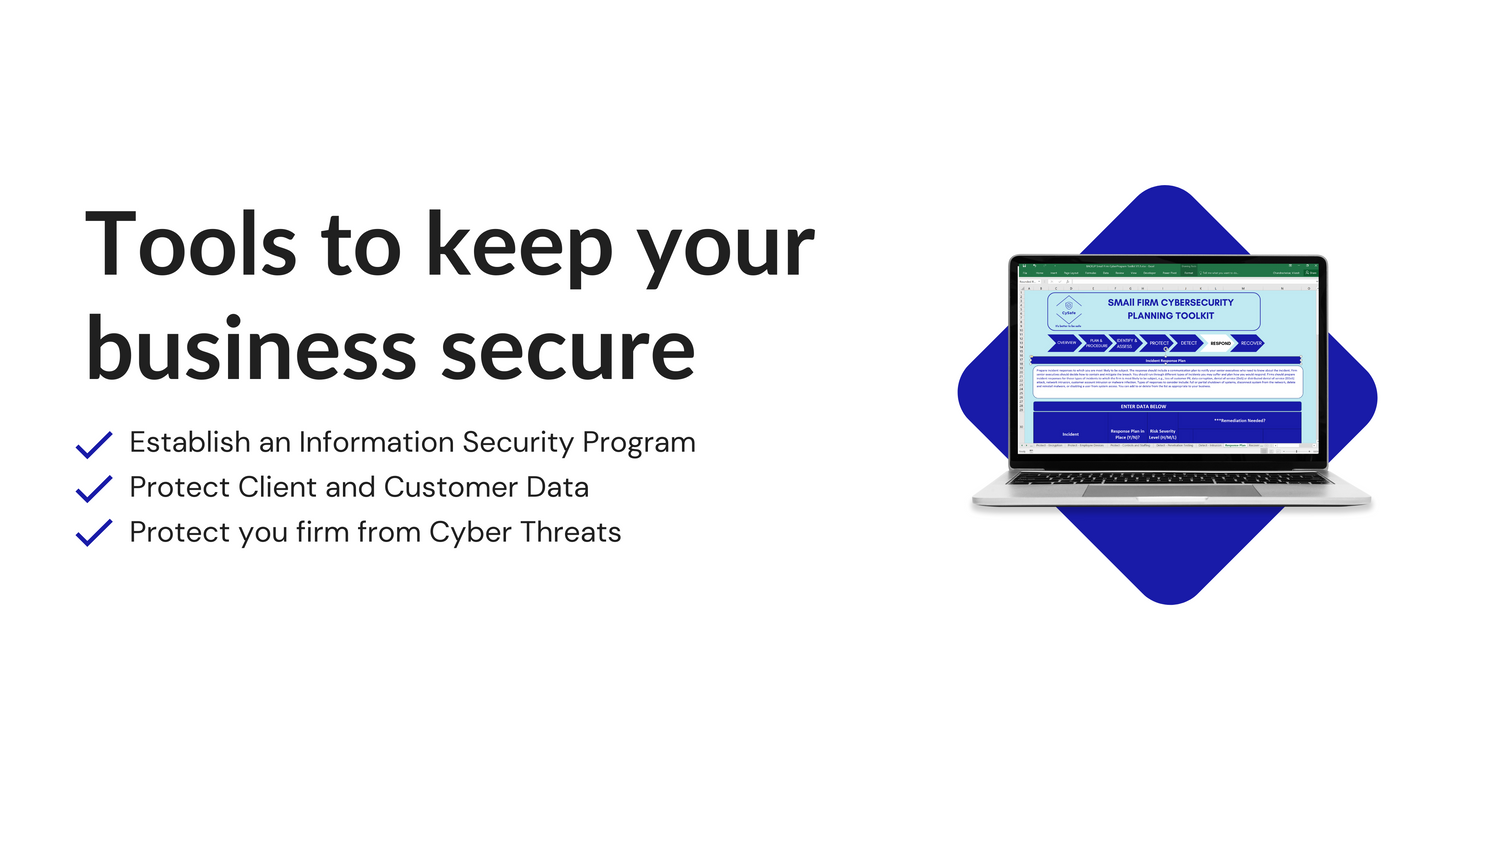 Cyber tools to secure businesses